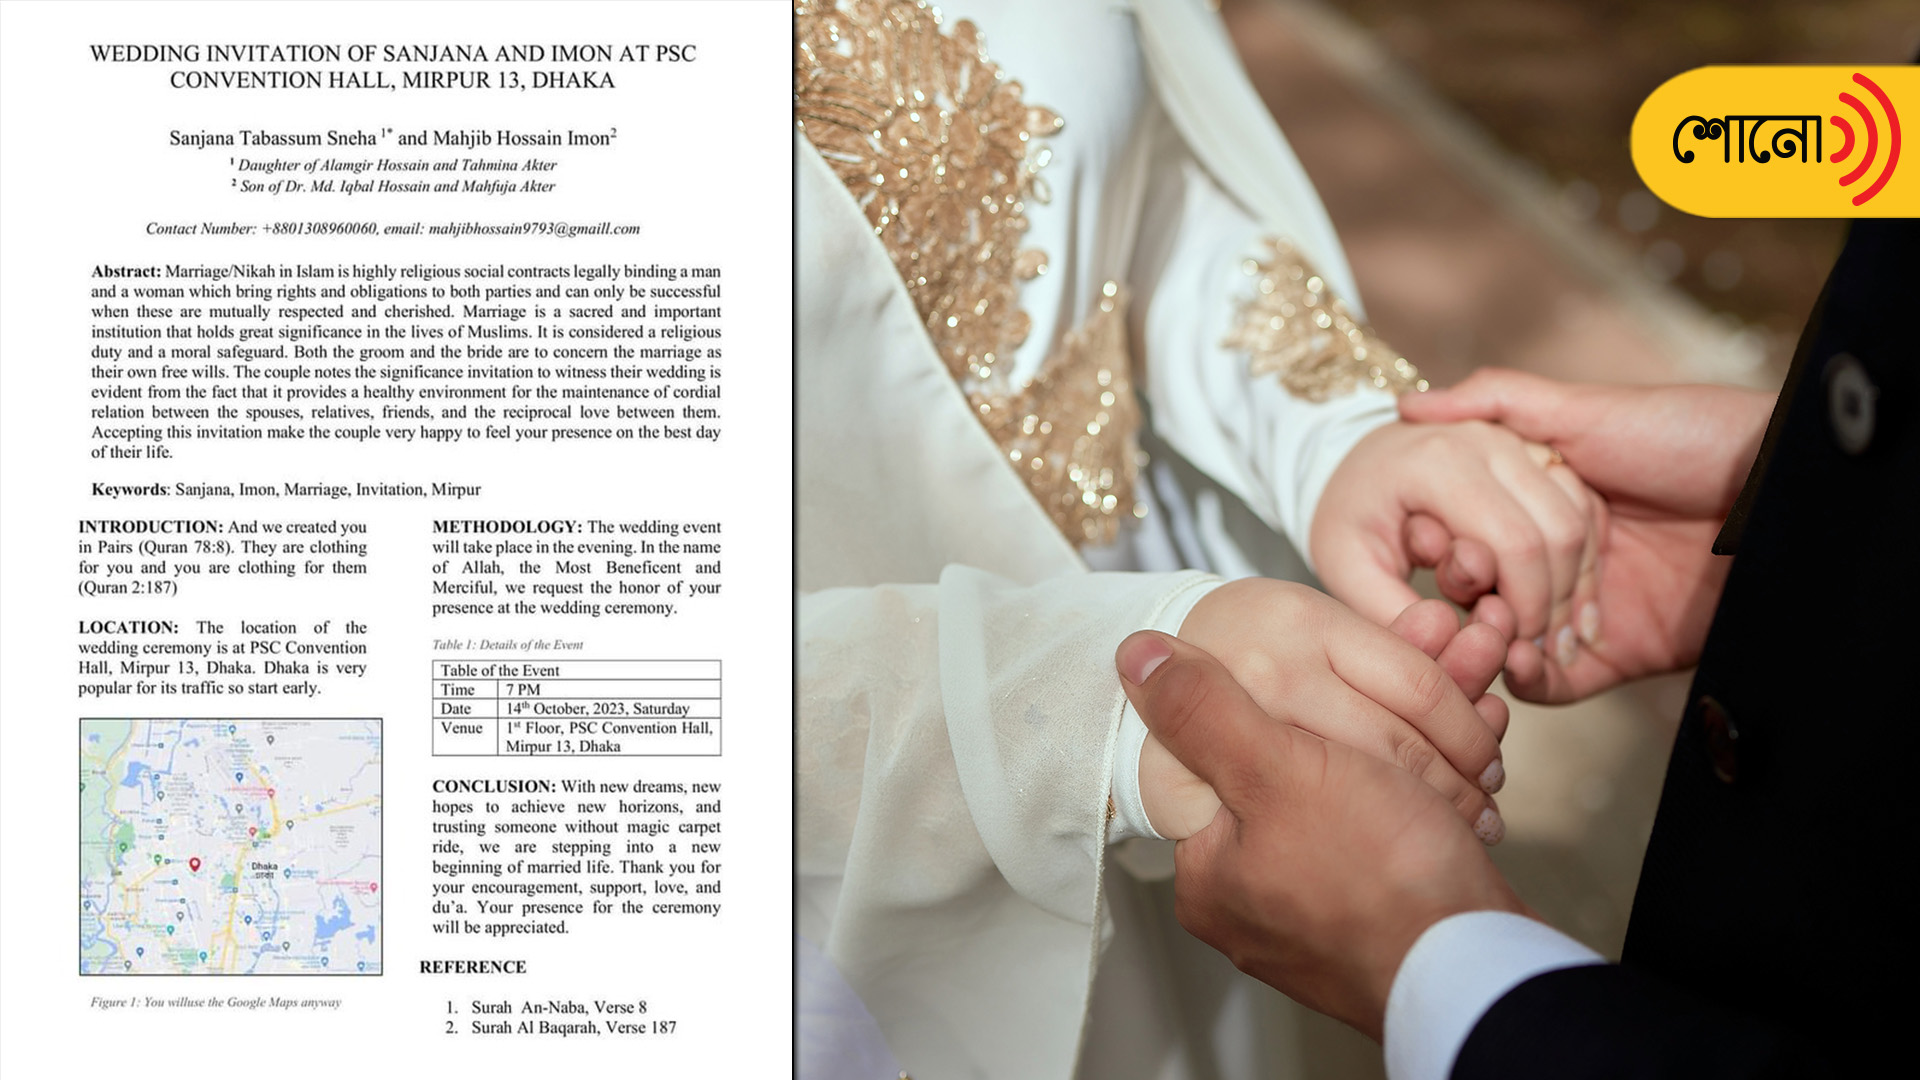 Bangladeshi couple’s wedding card resembles research paper, goes viral